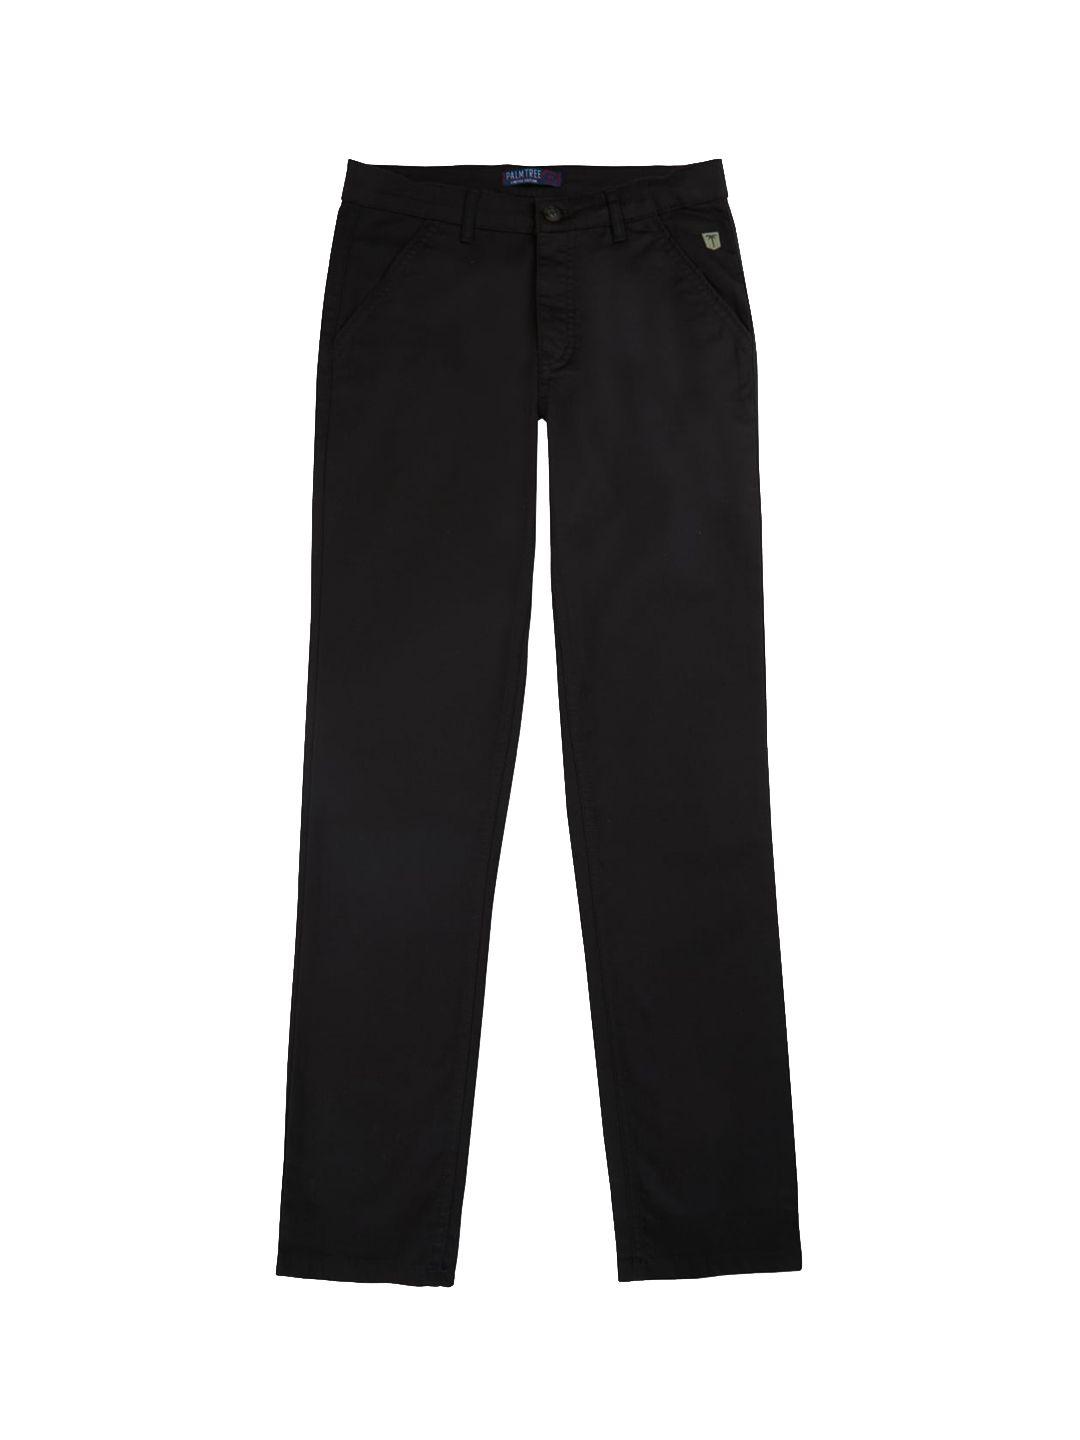 palm-tree-boys-straight-fit-elasticated-cotton-chinos-trouser